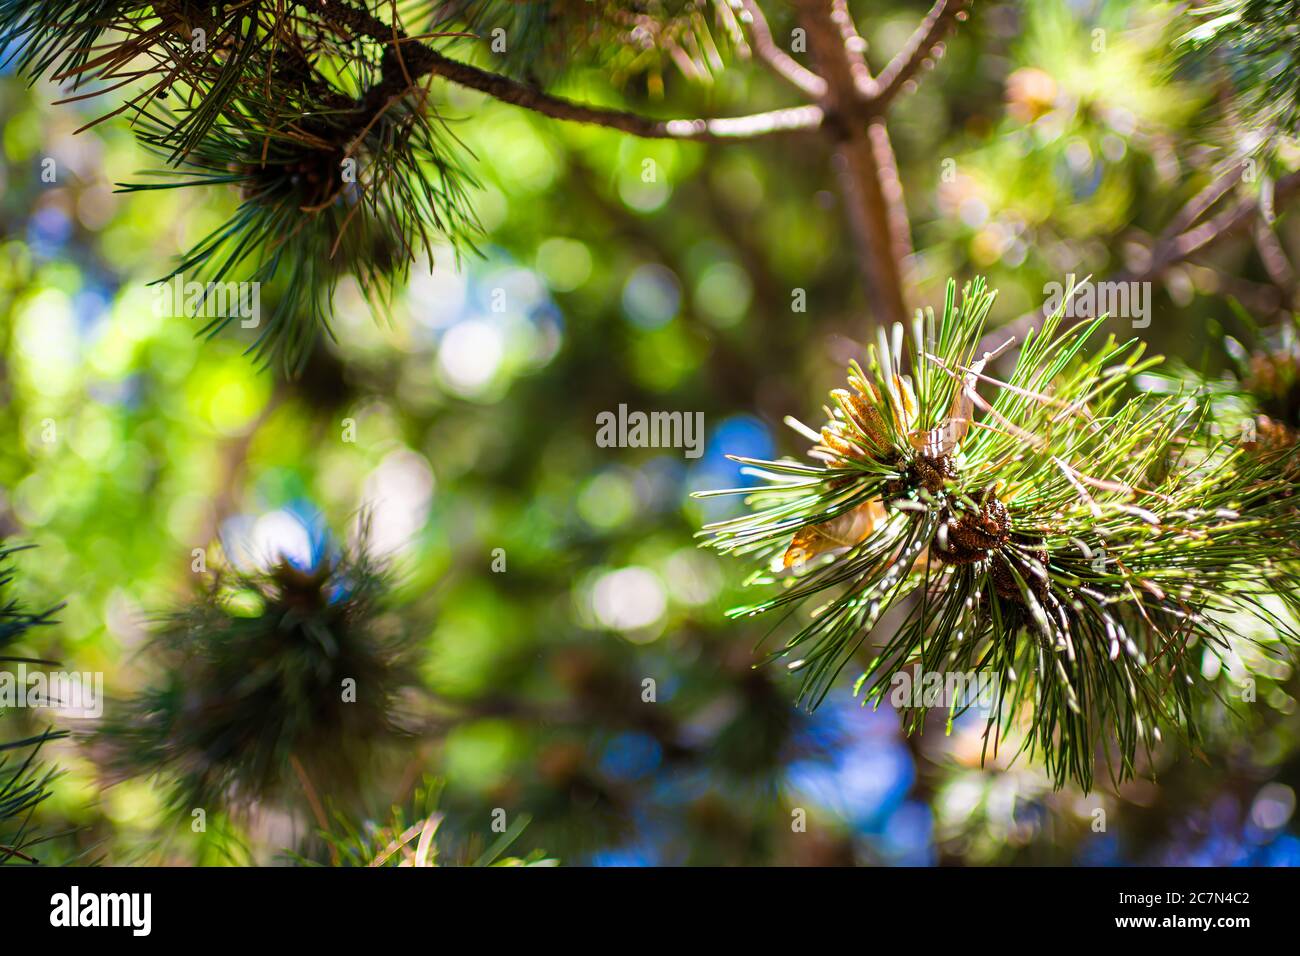 Macro closeup of pine cones pollen and needles on tree branch with blue sky and forest in blurry blurred background Stock Photo